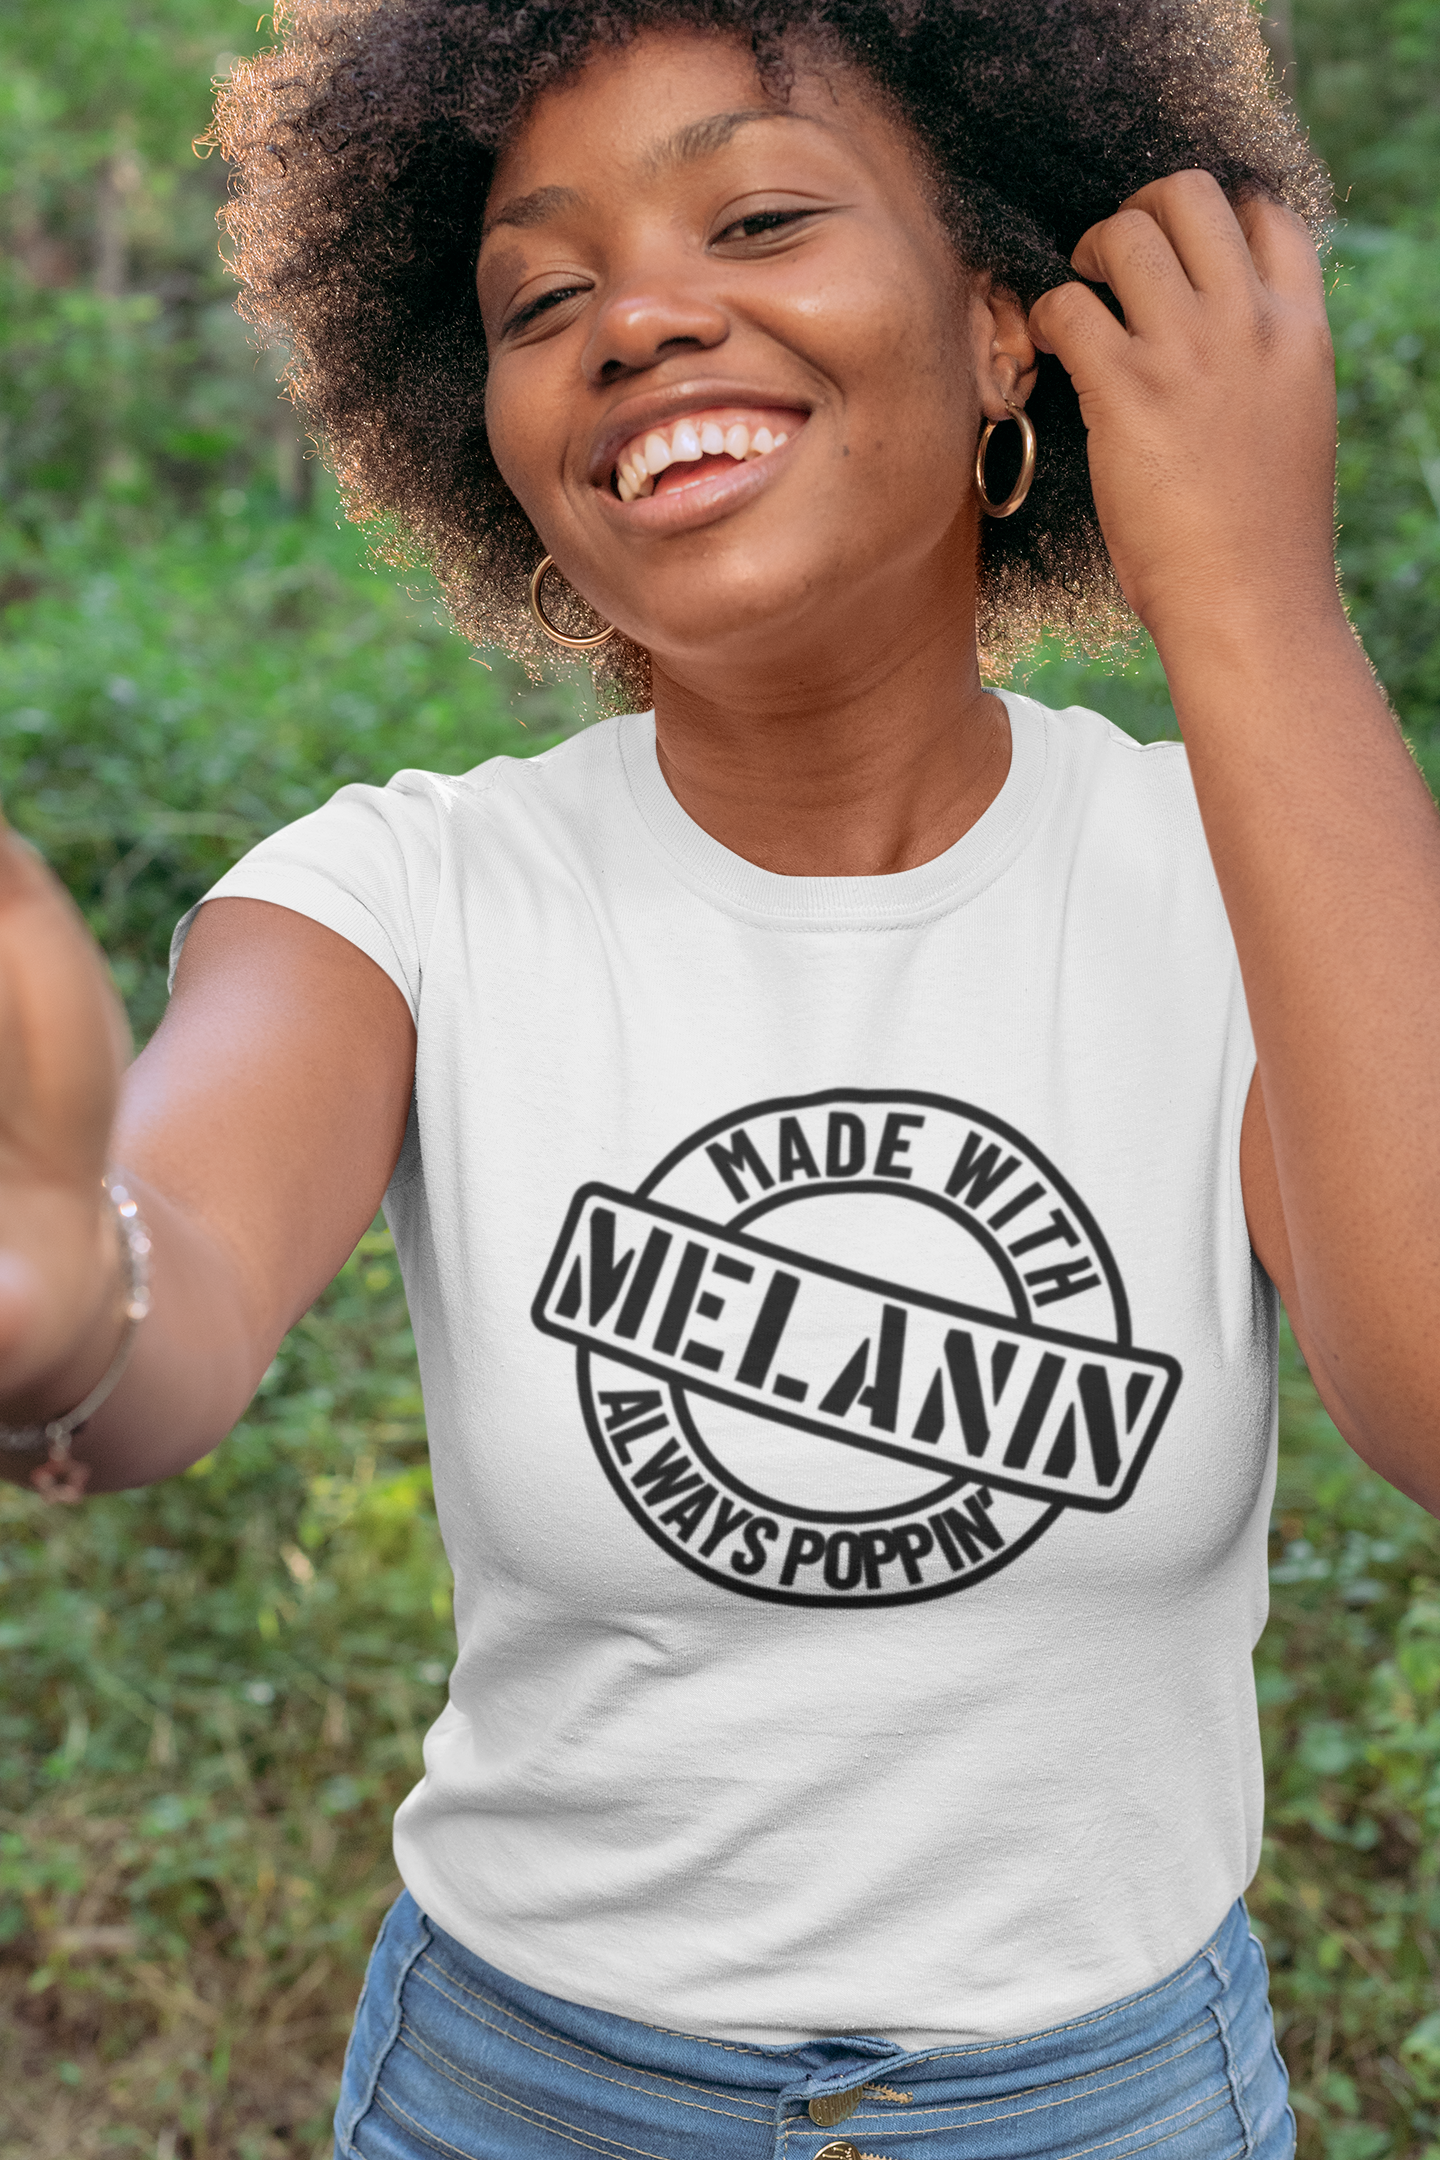 Made With Melanin